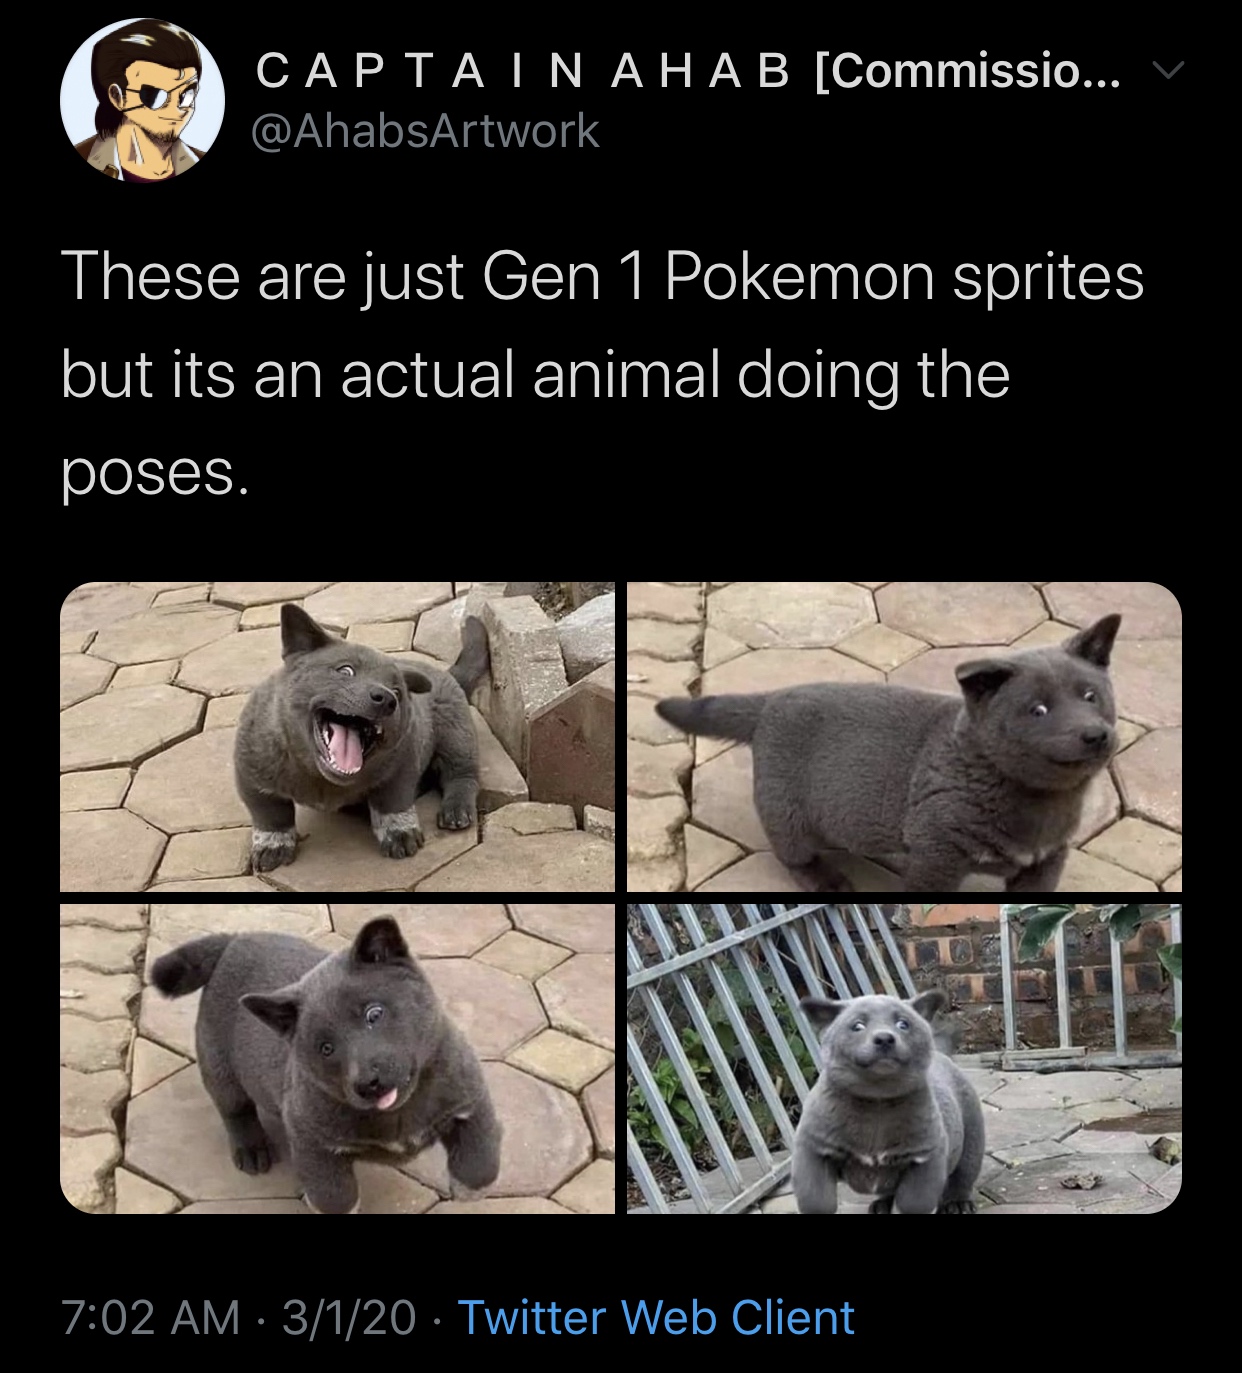 photo caption - Captain A Hab Commissio... V These are just Gen 1 Pokemon sprites but its an actual animal doing the poses. 3120 Twitter Web Client